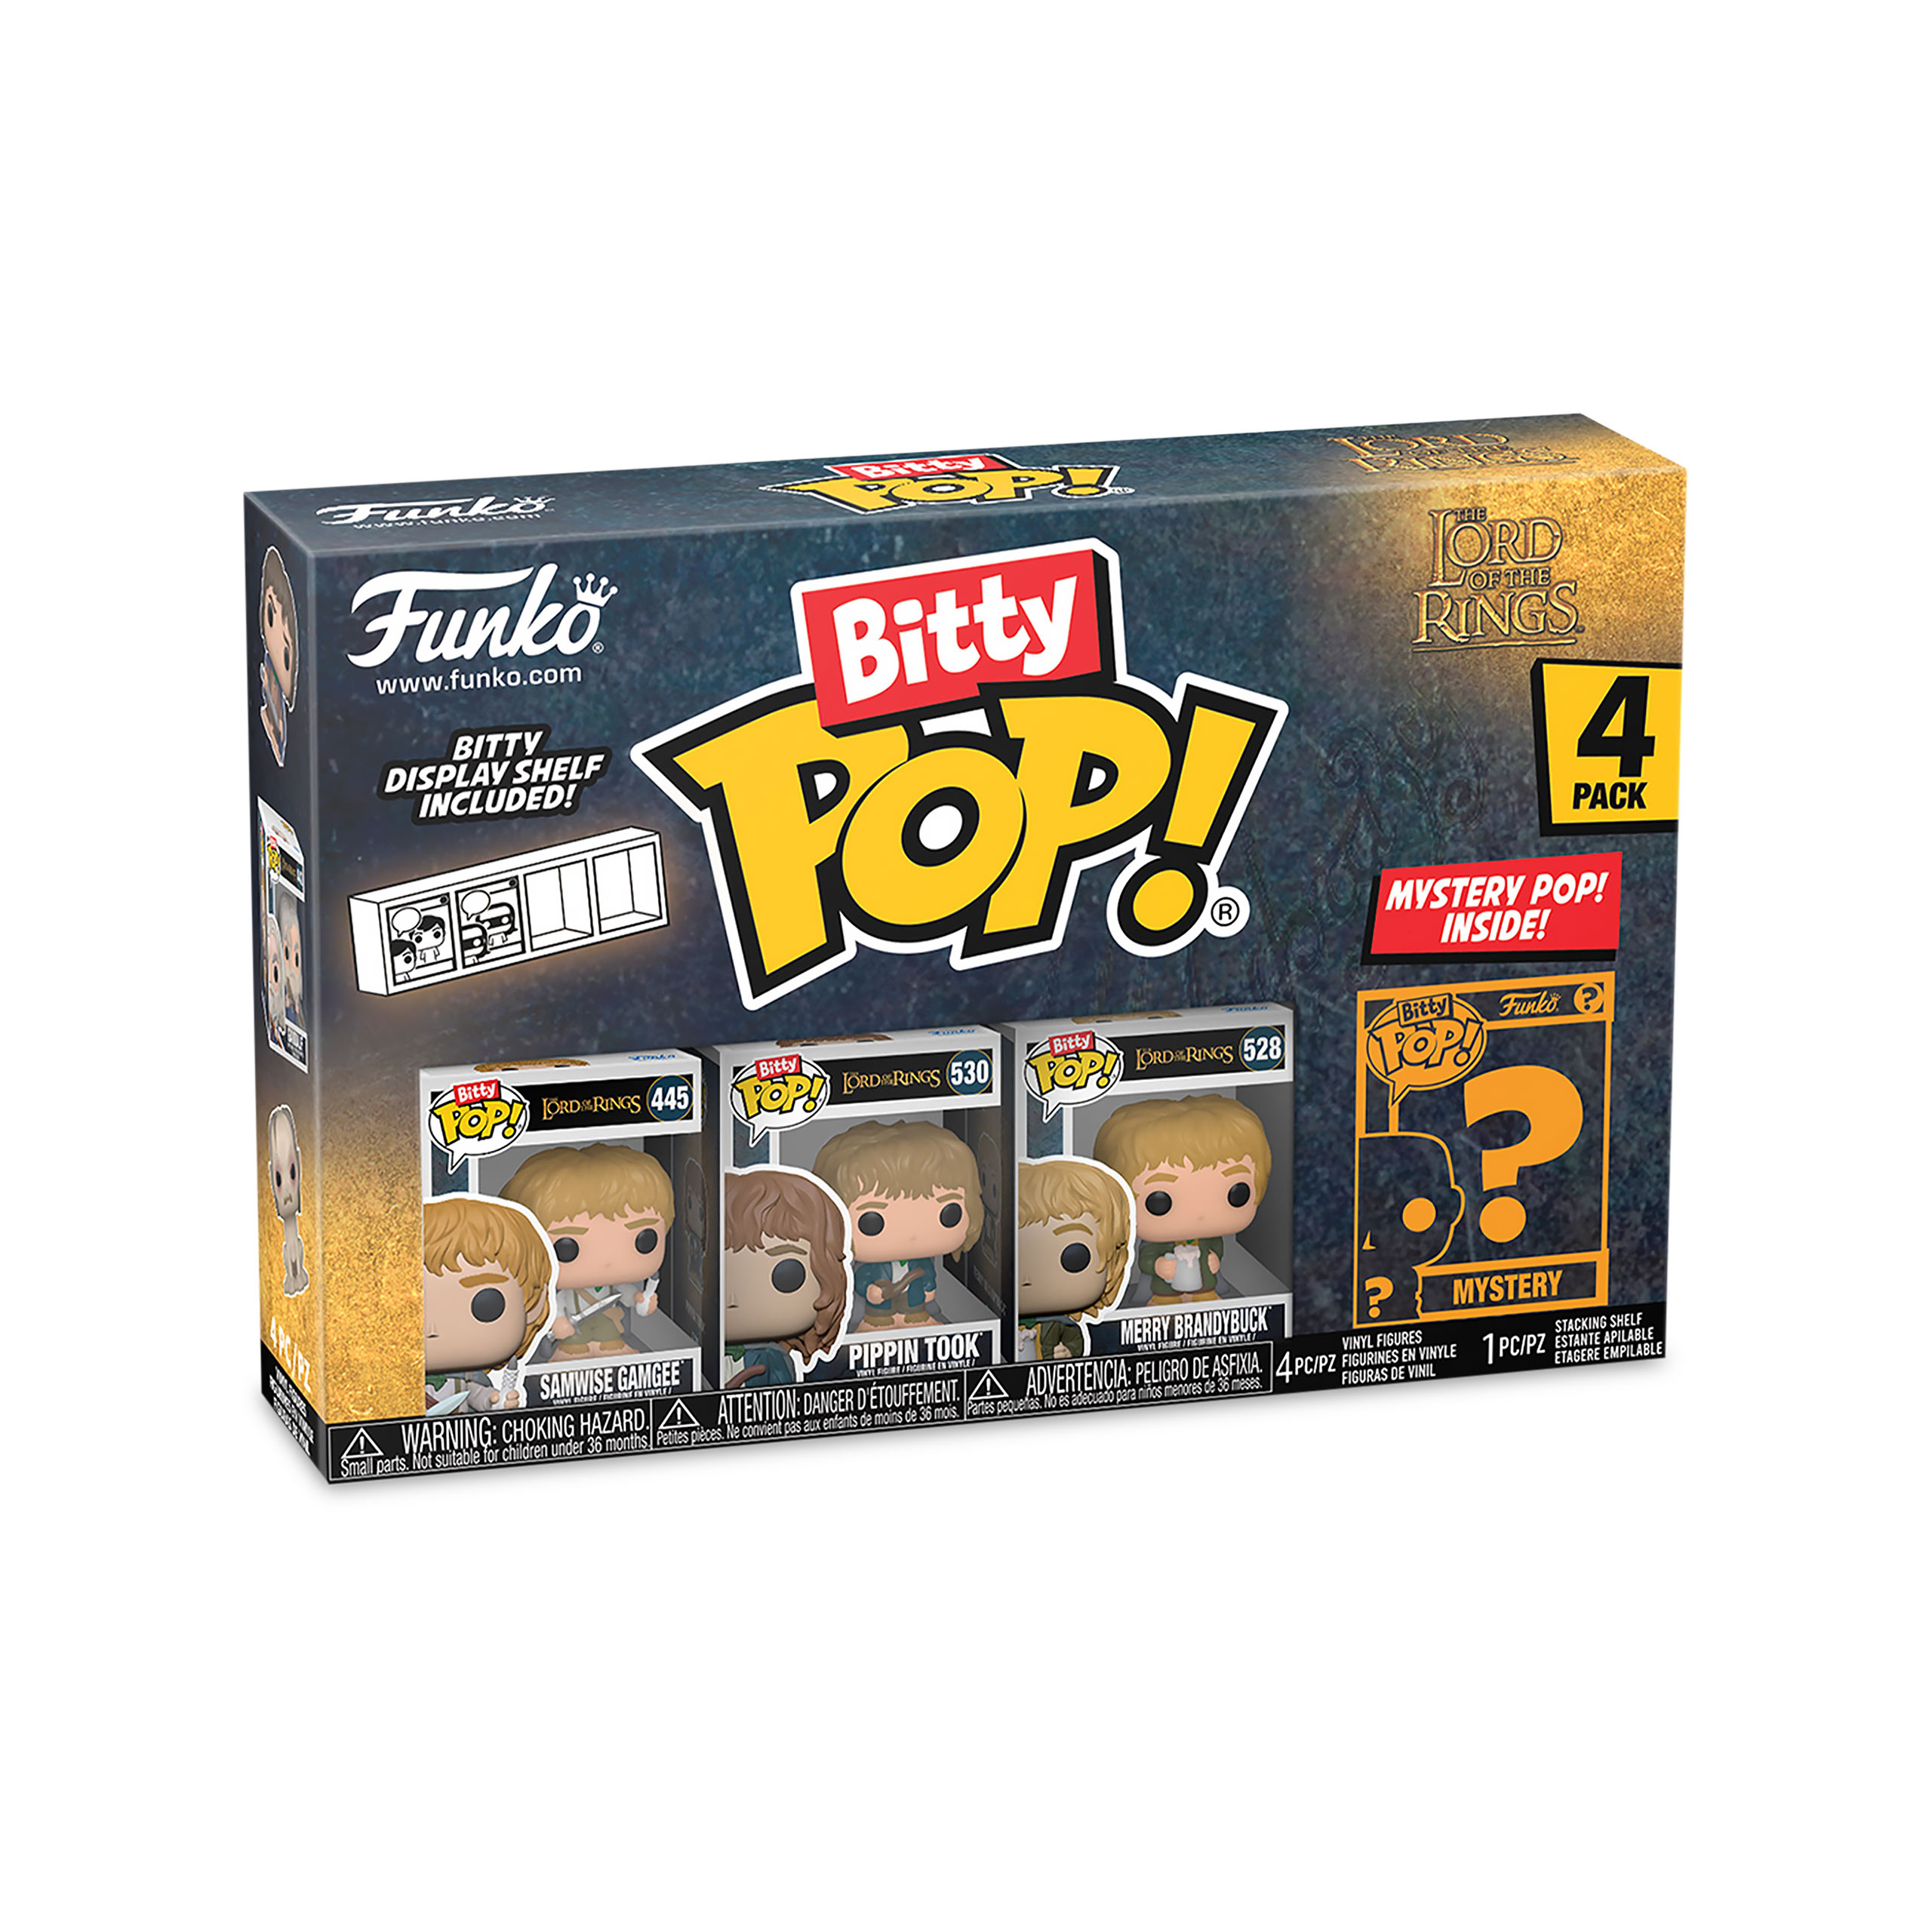 Lord of the Rings - Funko Bitty Pop 4-piece Figure Set Series 3